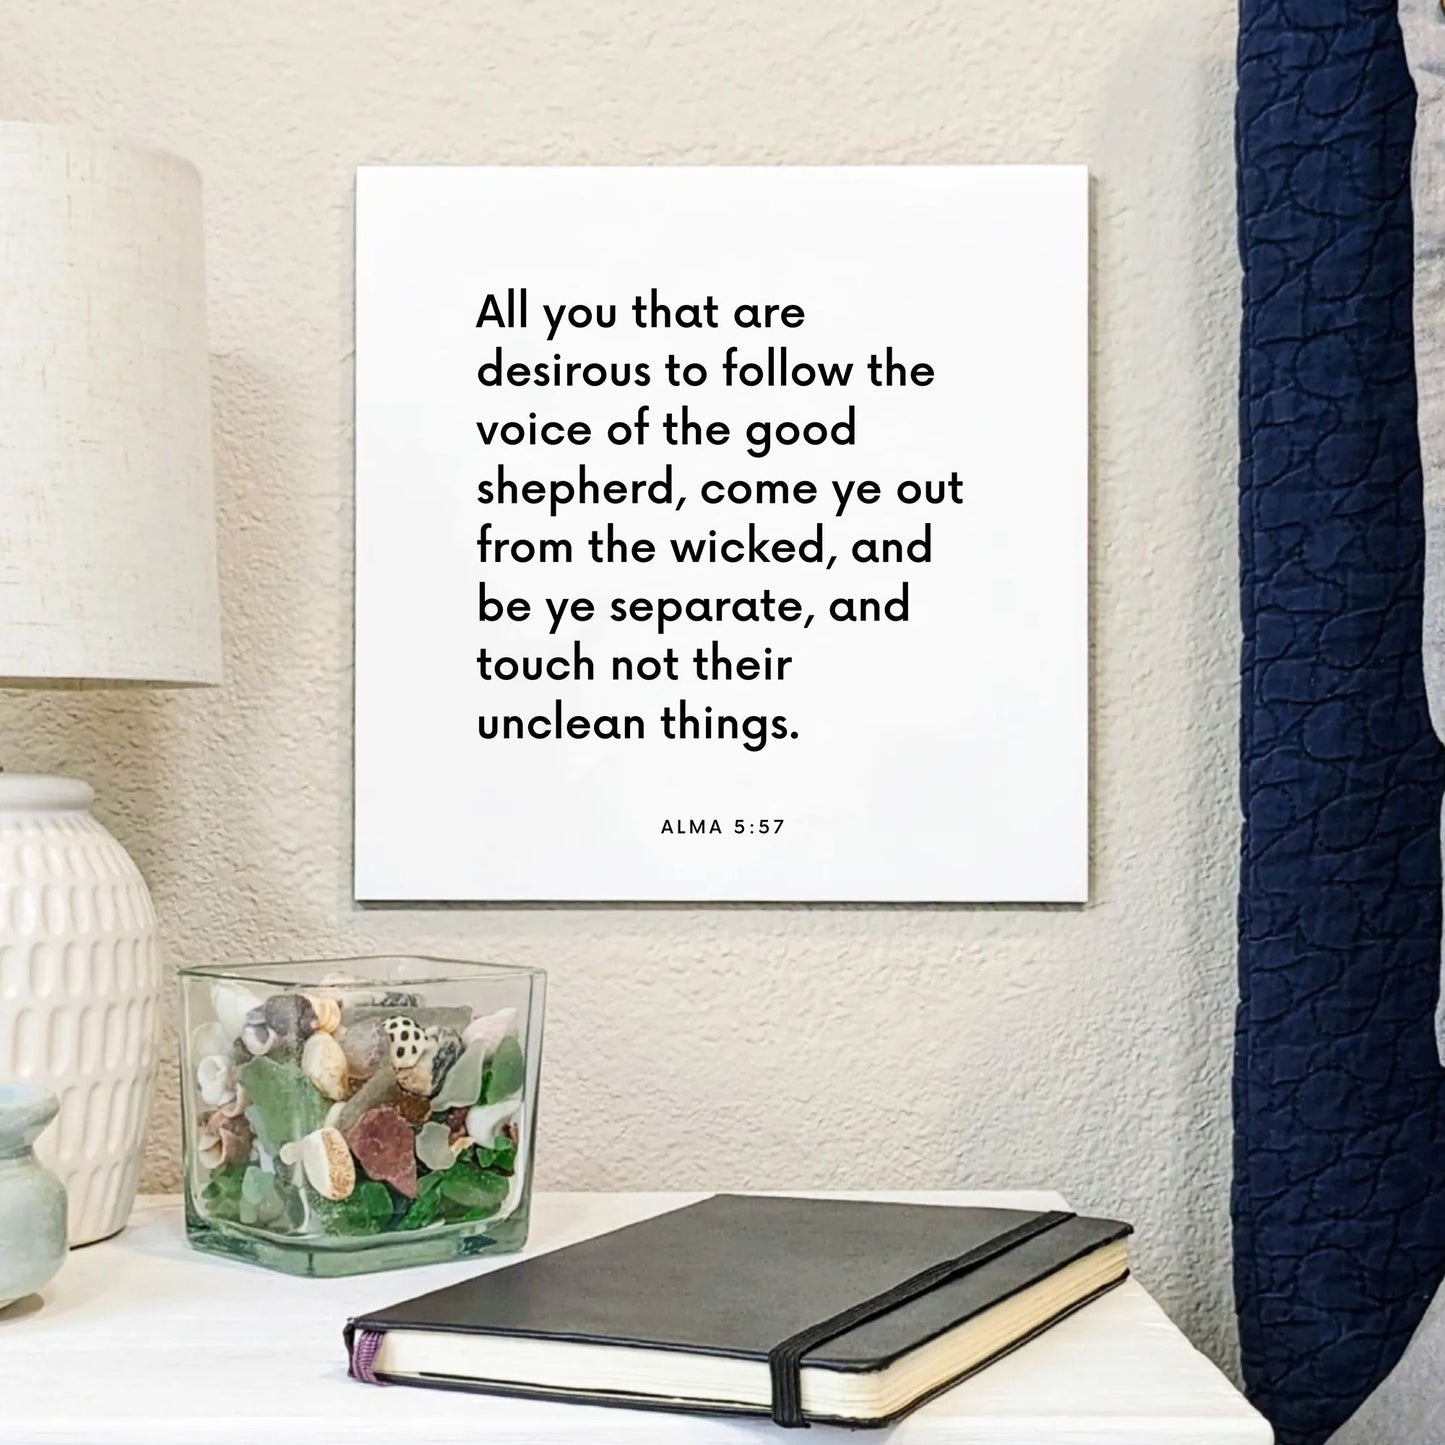 Bedside mouting of the scripture tile for Alma 5:57 - "Touch not their unclean things"